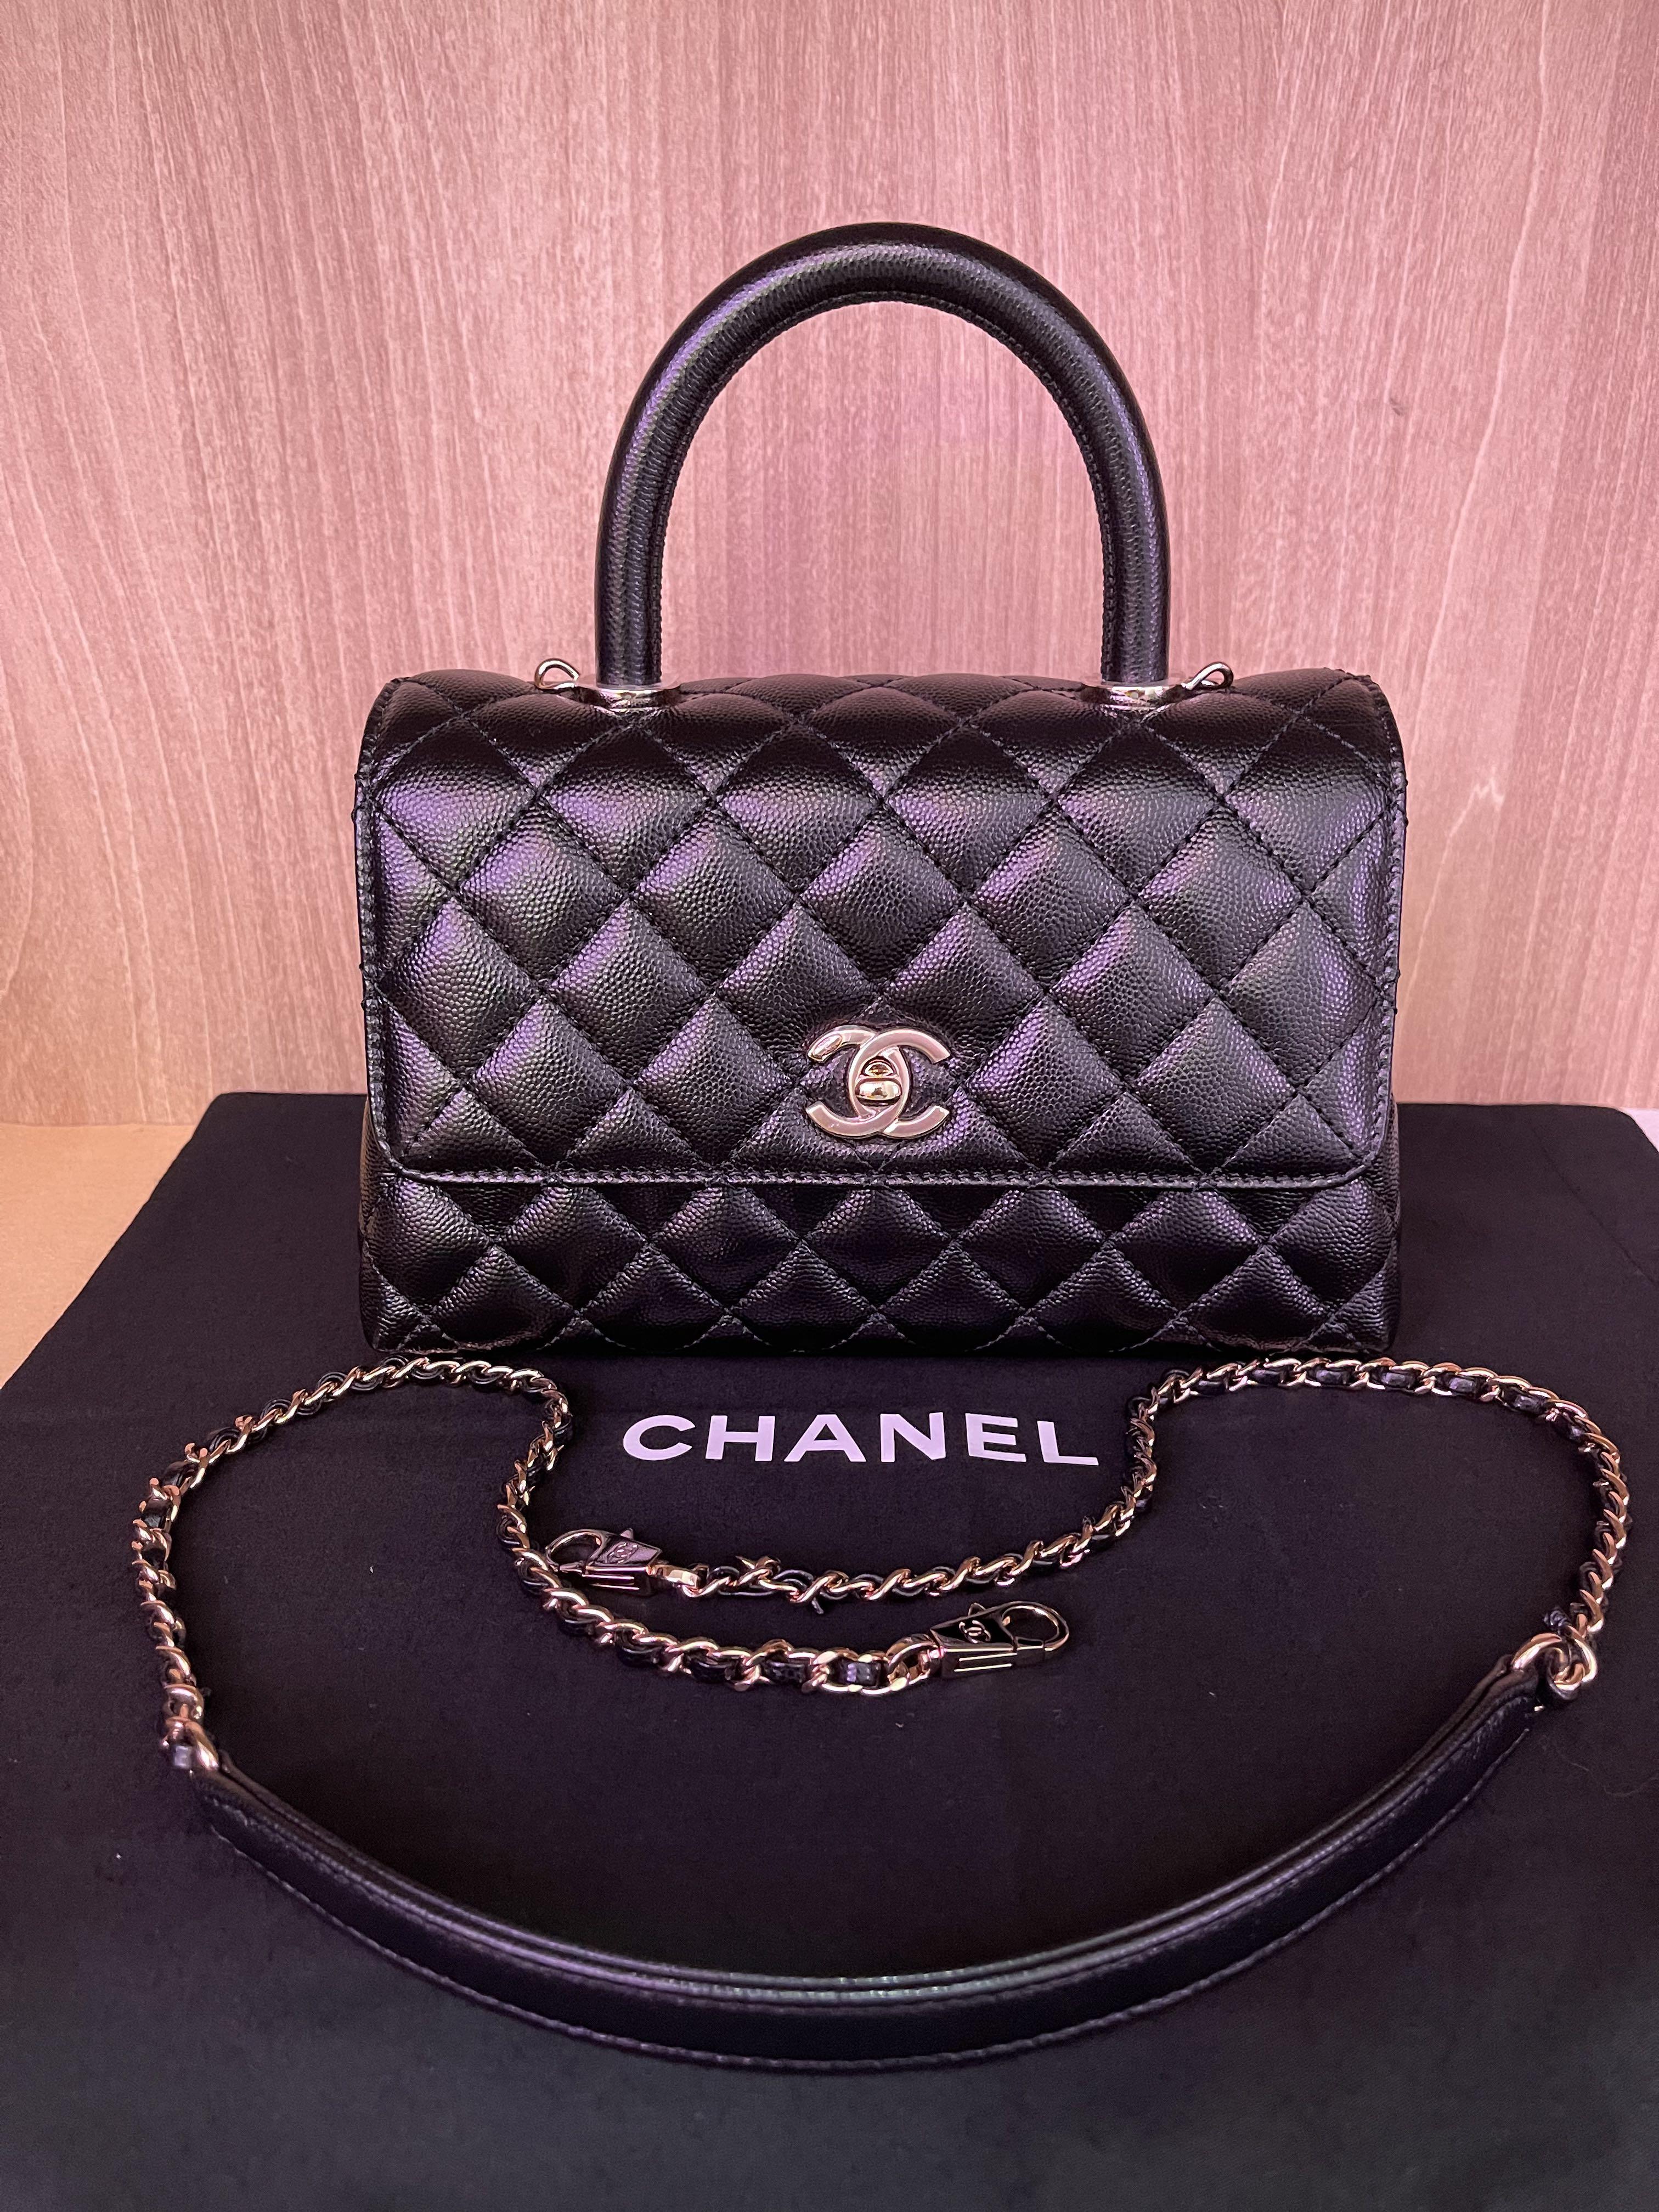 chanel quilted fabric bag